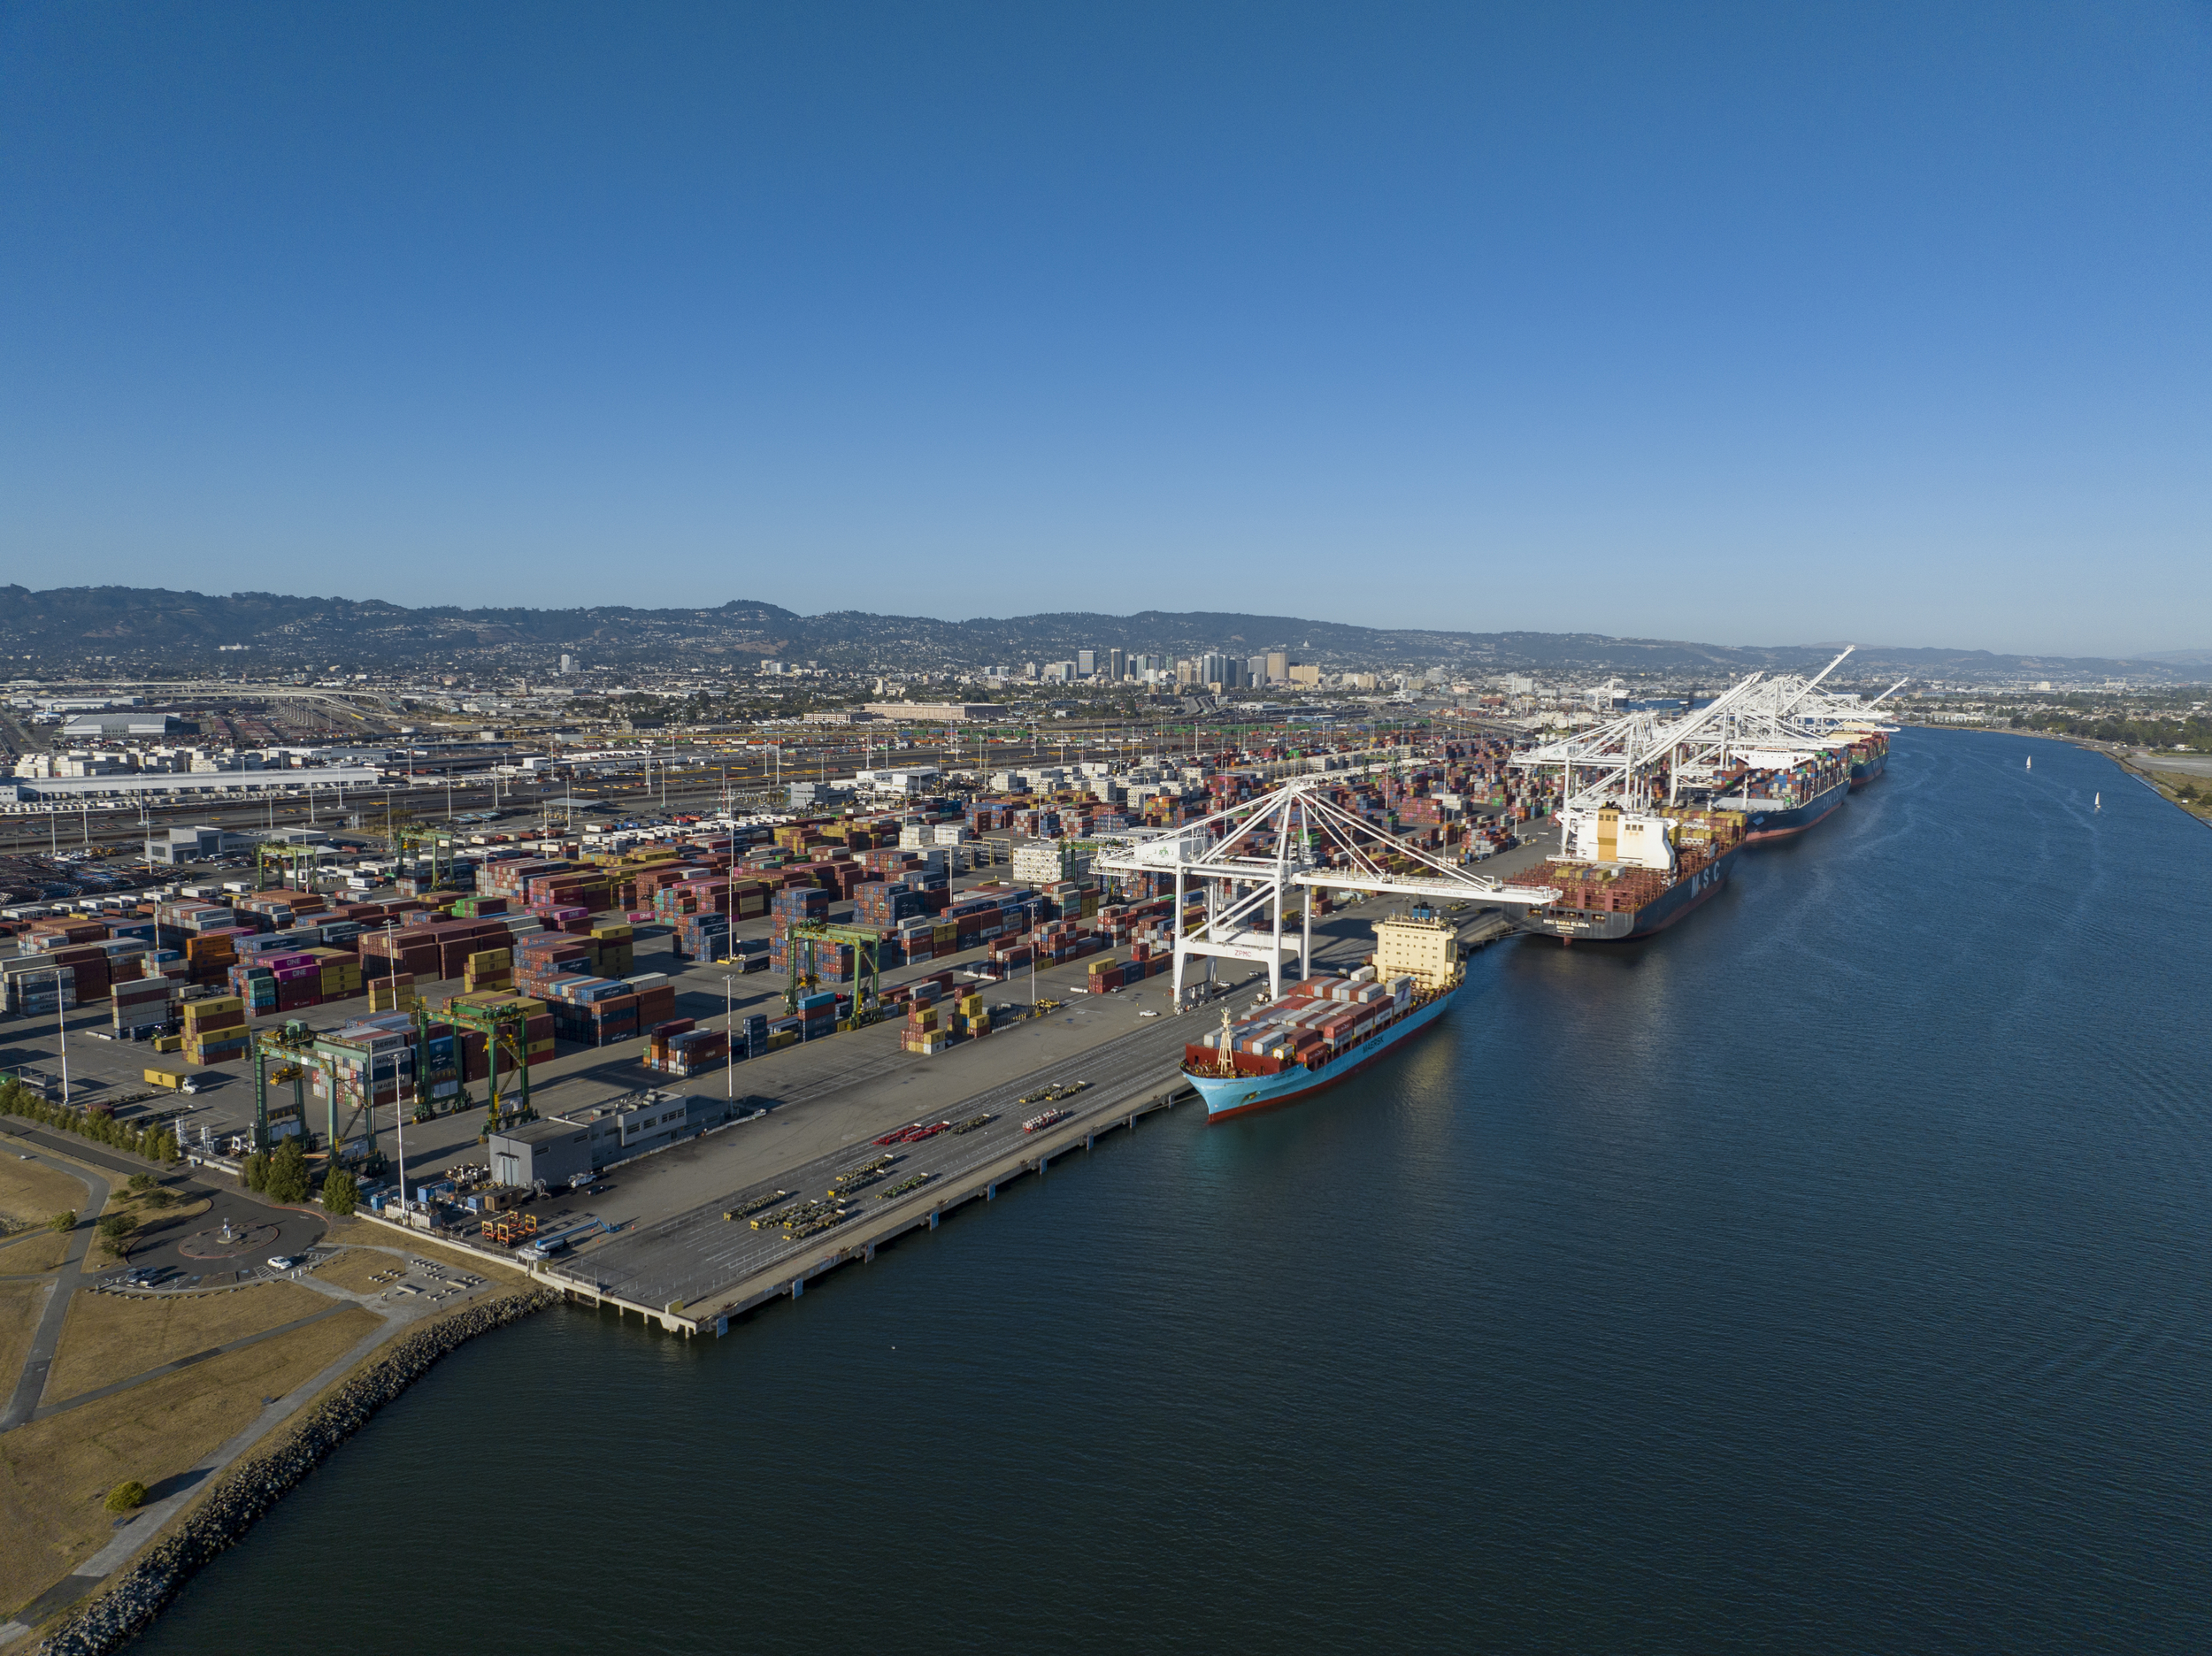 Aerial View of the Port of Oakland